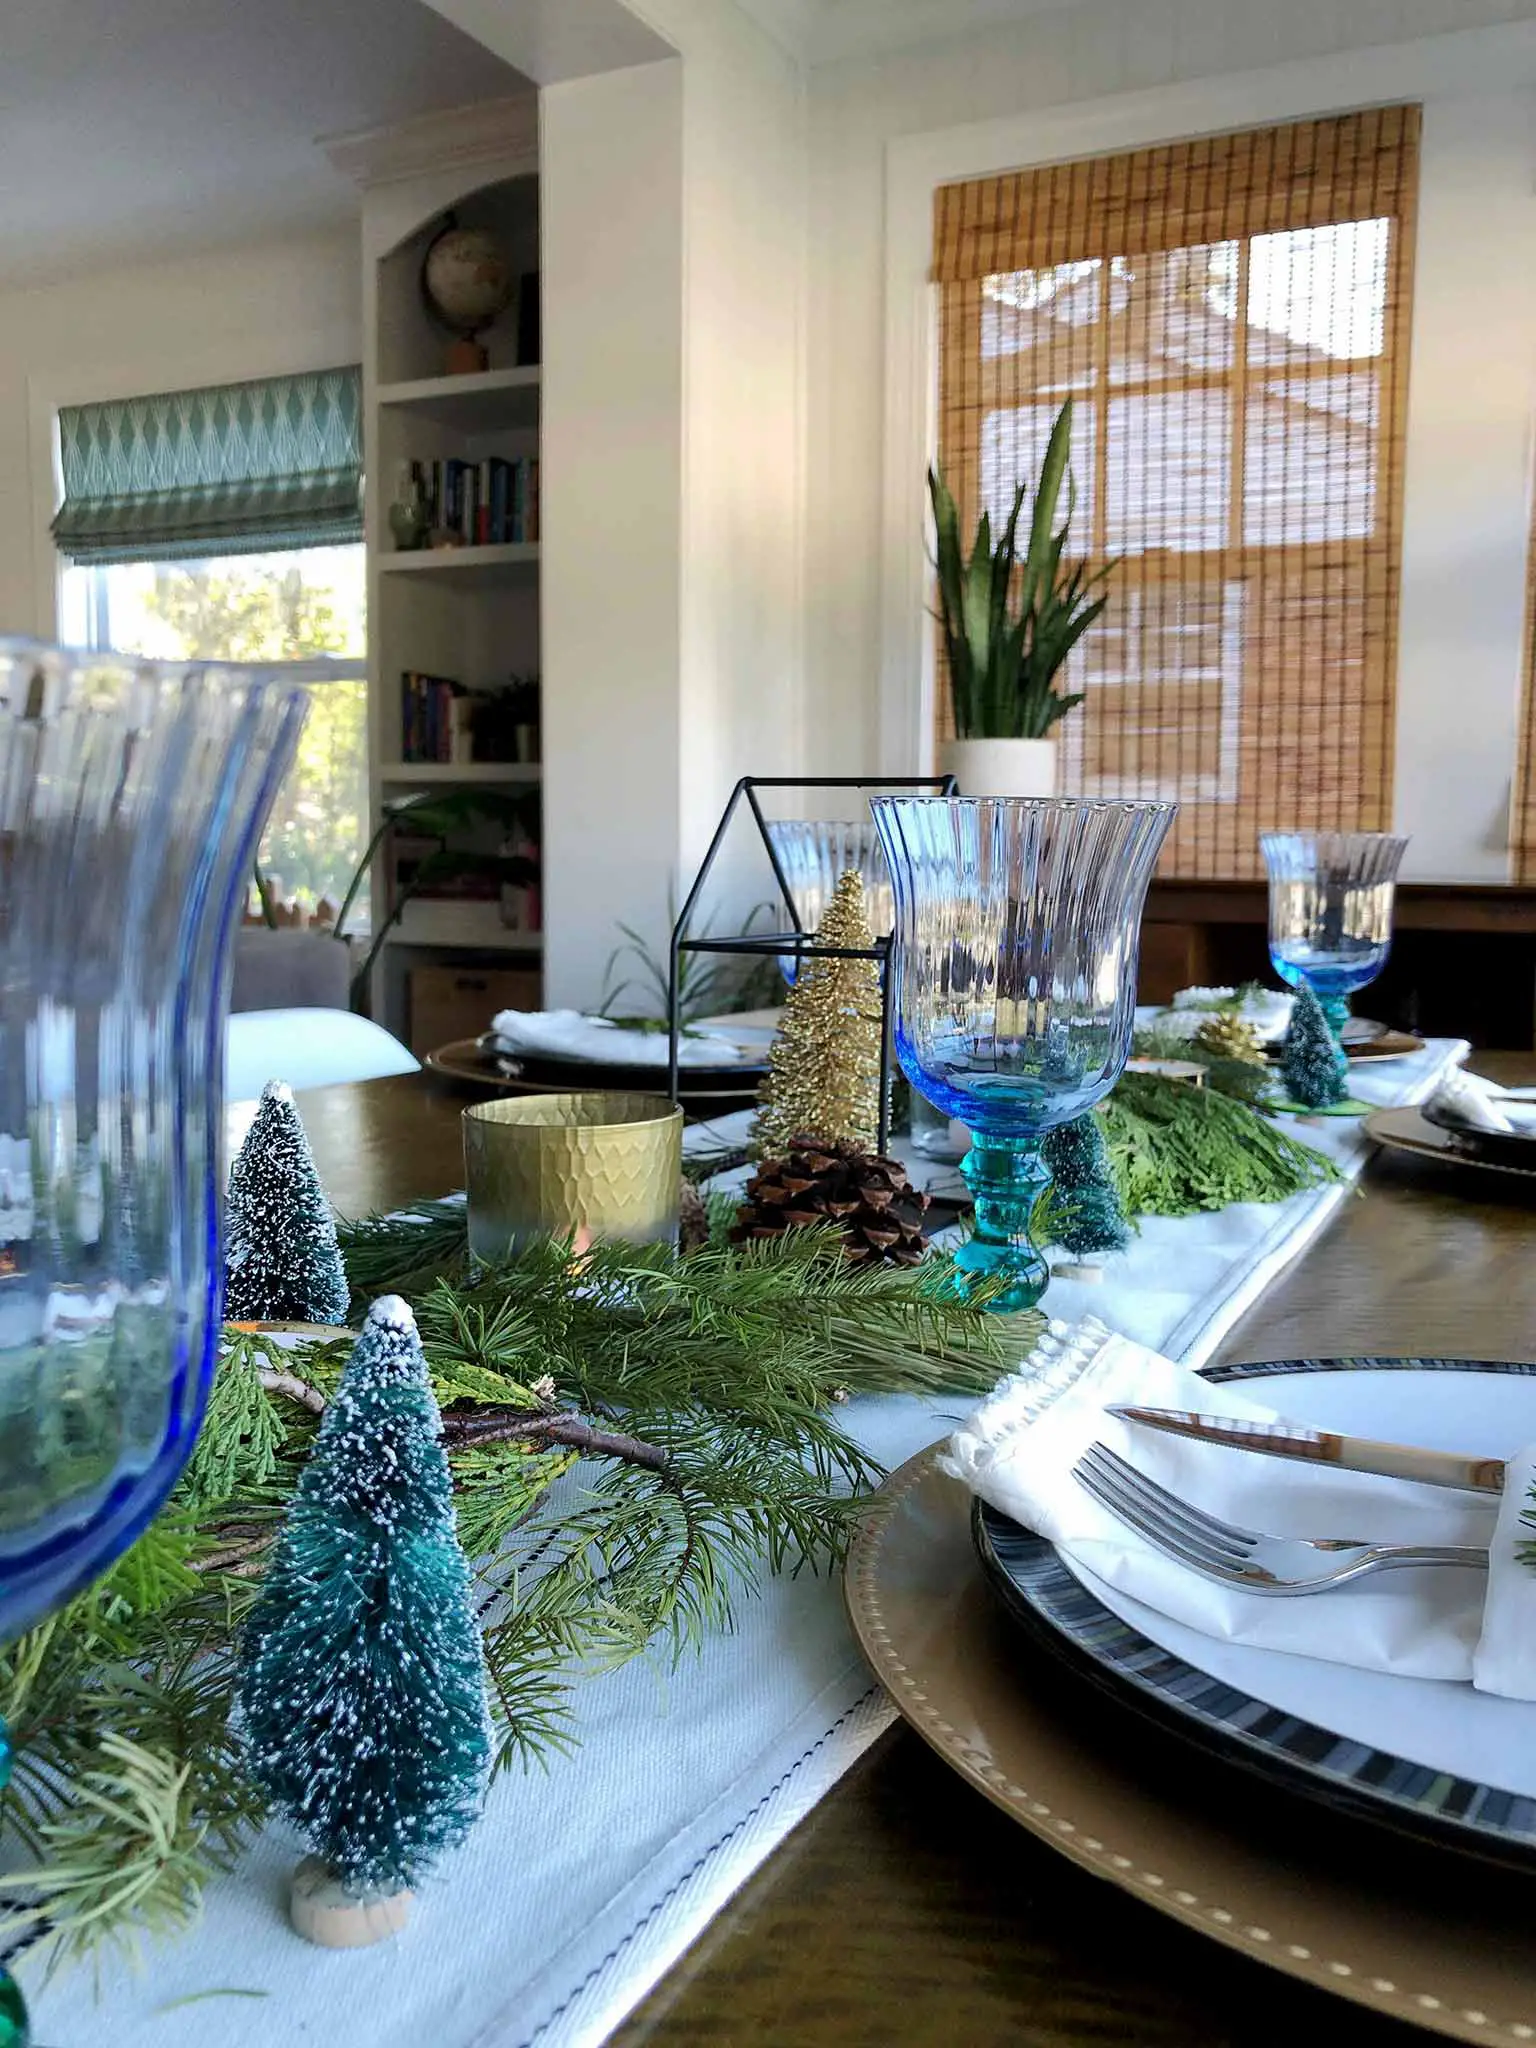 Bottle brush trees | How to Create a Beautiful Tablescape on a Budget | That Homebird Life Blog #christmasdecor #tablescape